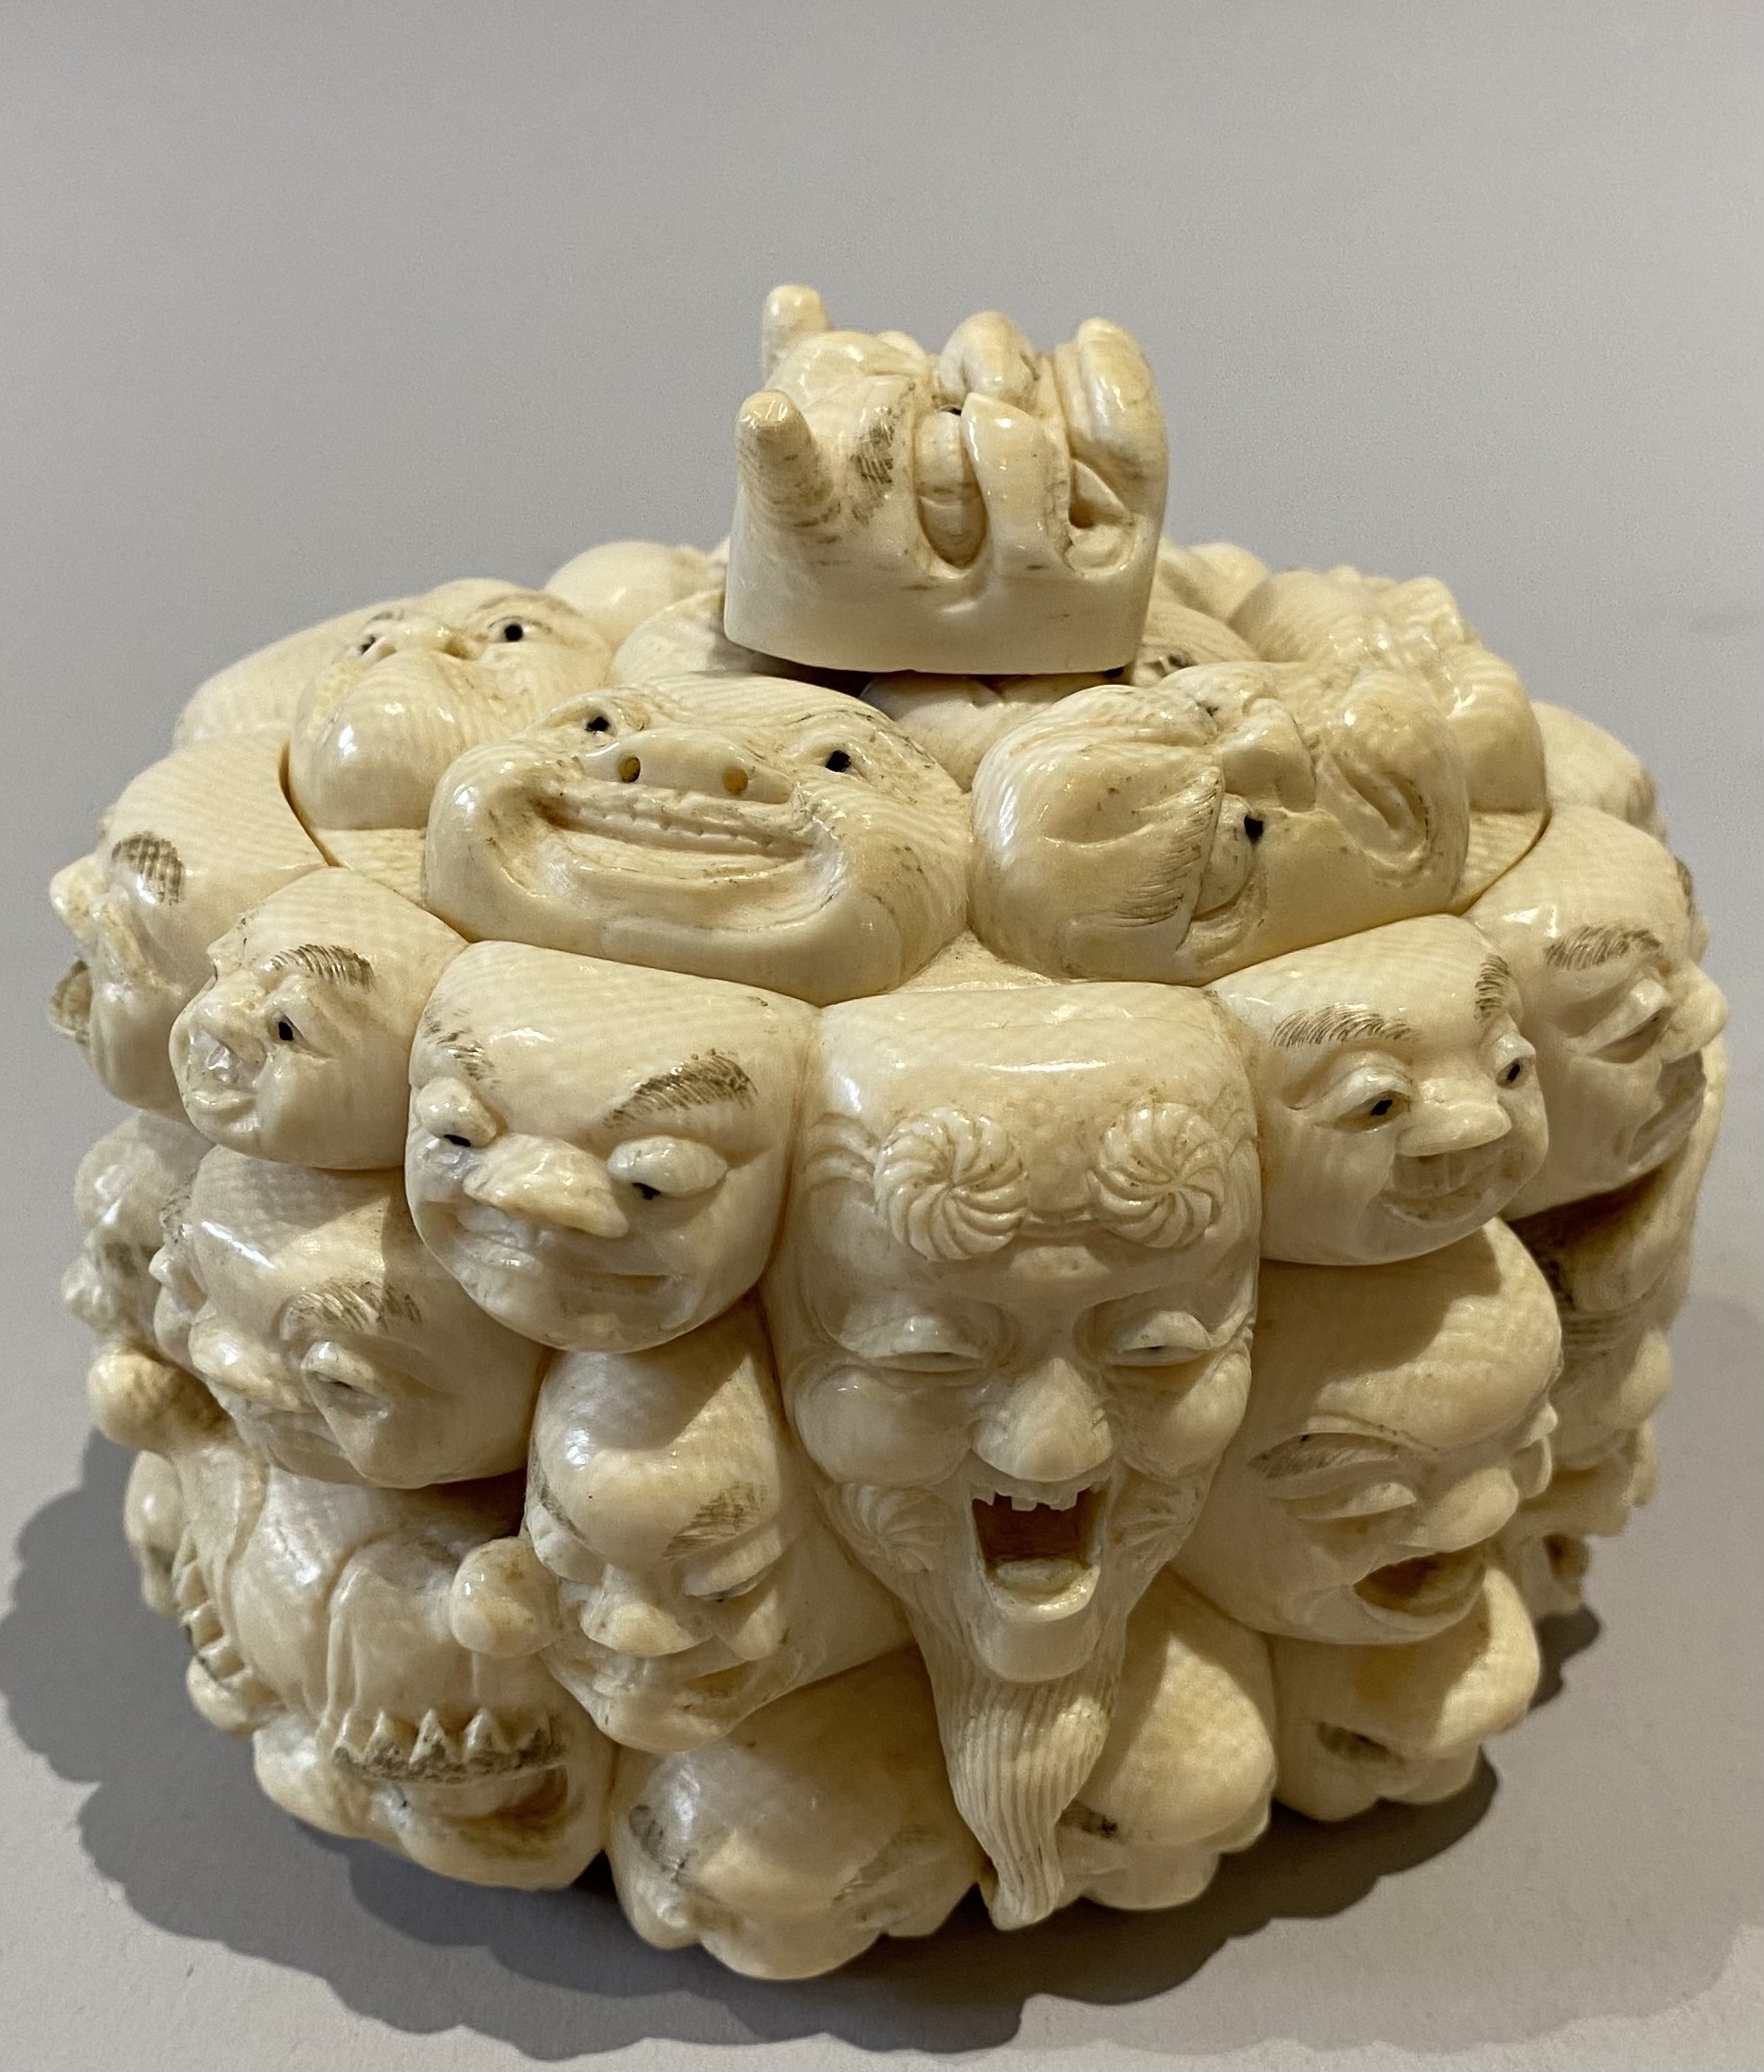 A JAPANESE IVORY DEVIL BOX AND COVER, MEIJI/TAISHO PERIOD